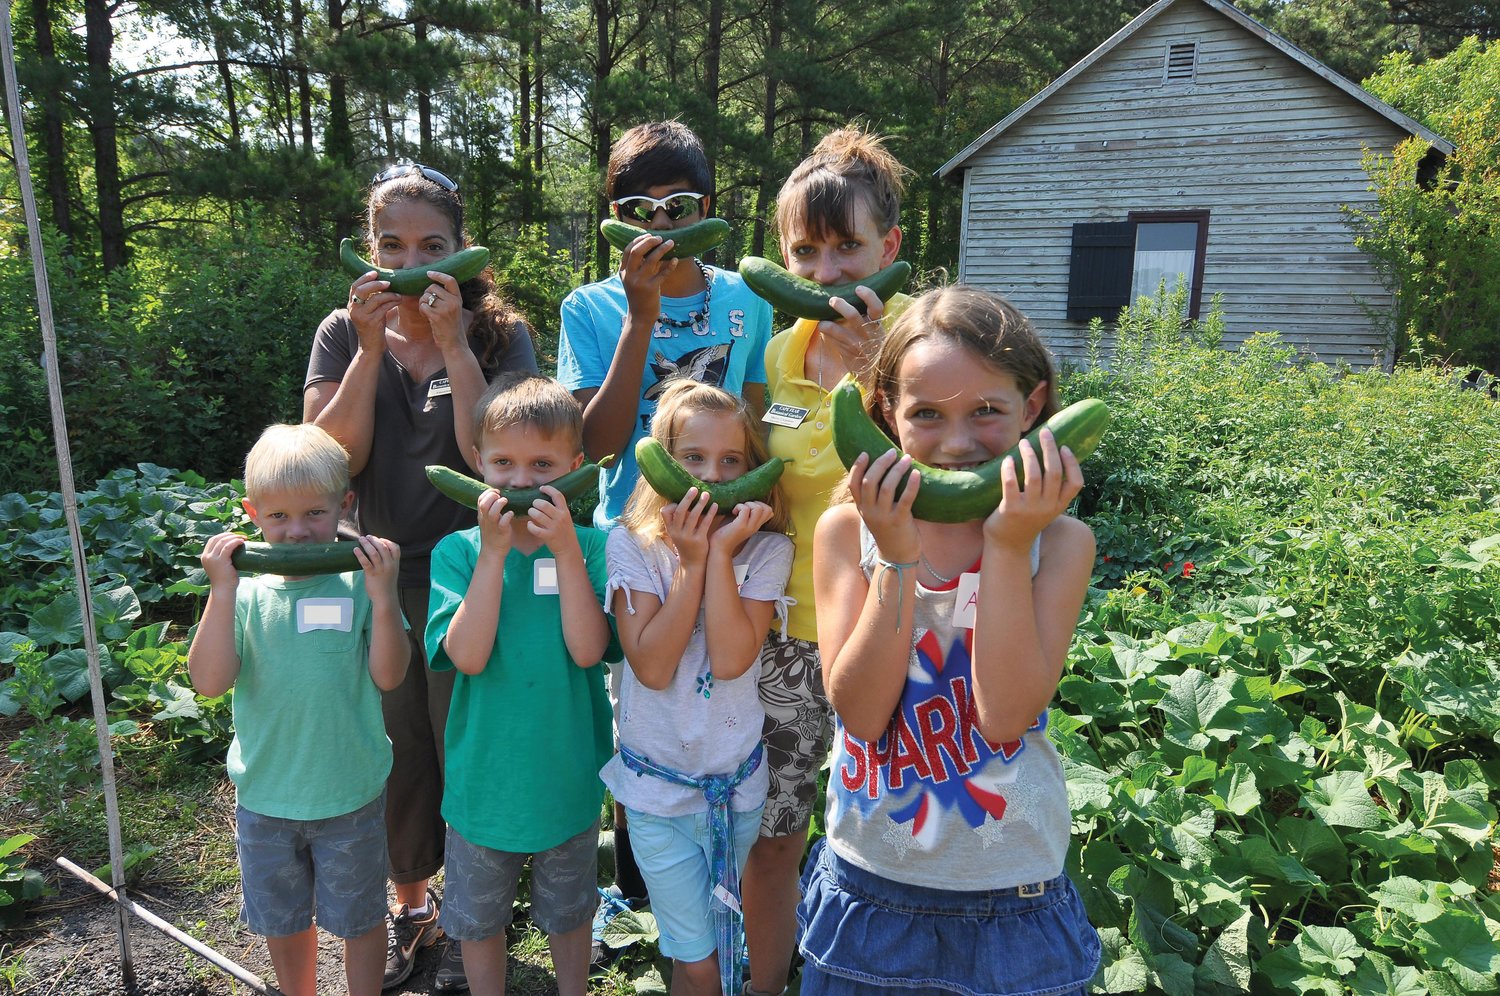 Cape Fear Botanical Garden offers several summer camps with different areas of focus.